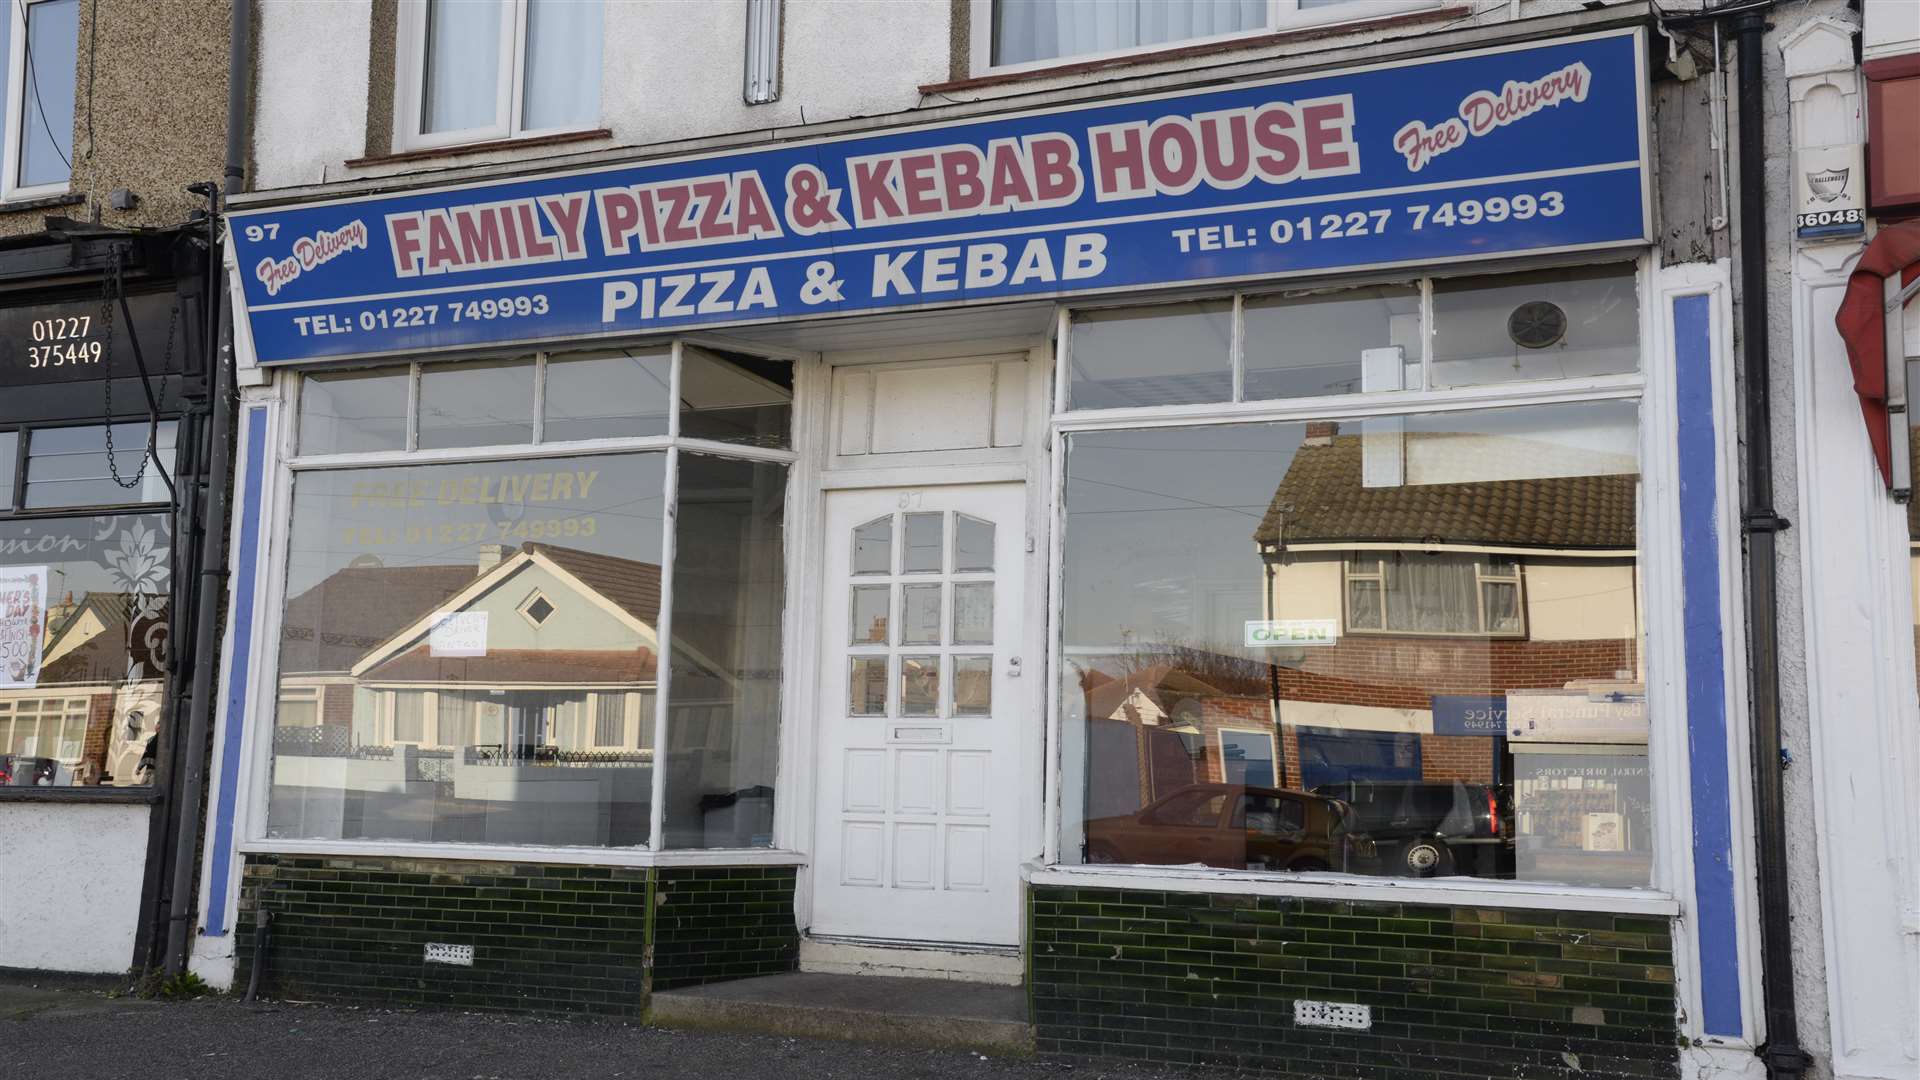 Family Pizza and Kebab in Sea Street, Herne Bay